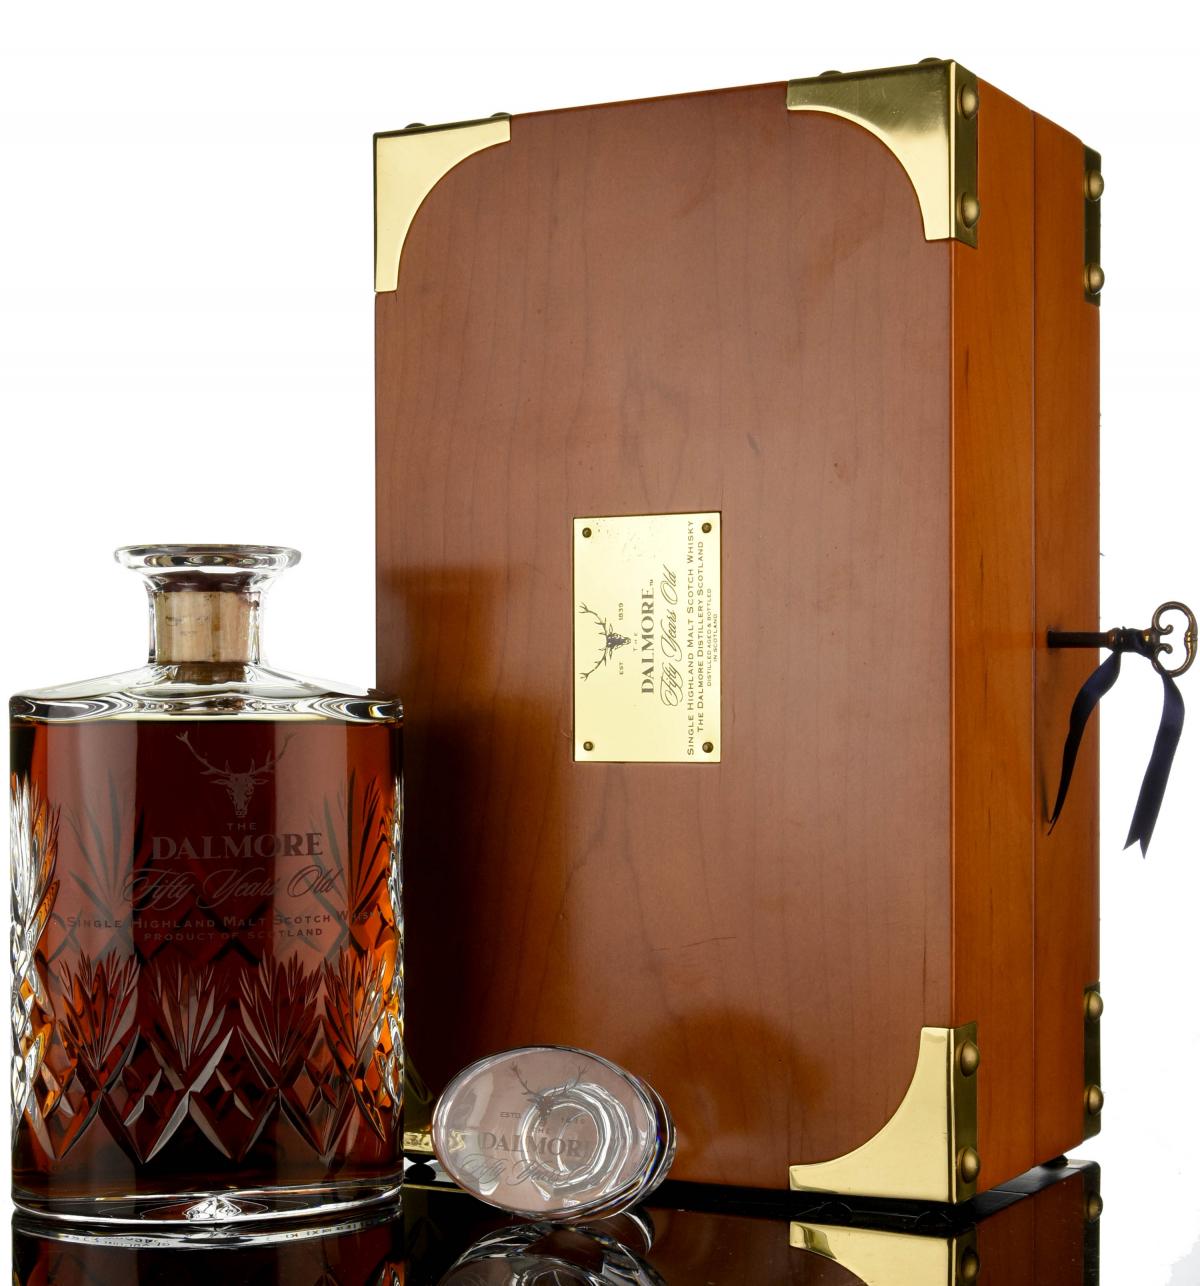 Dalmore 50 Year Old Crystal Decanter